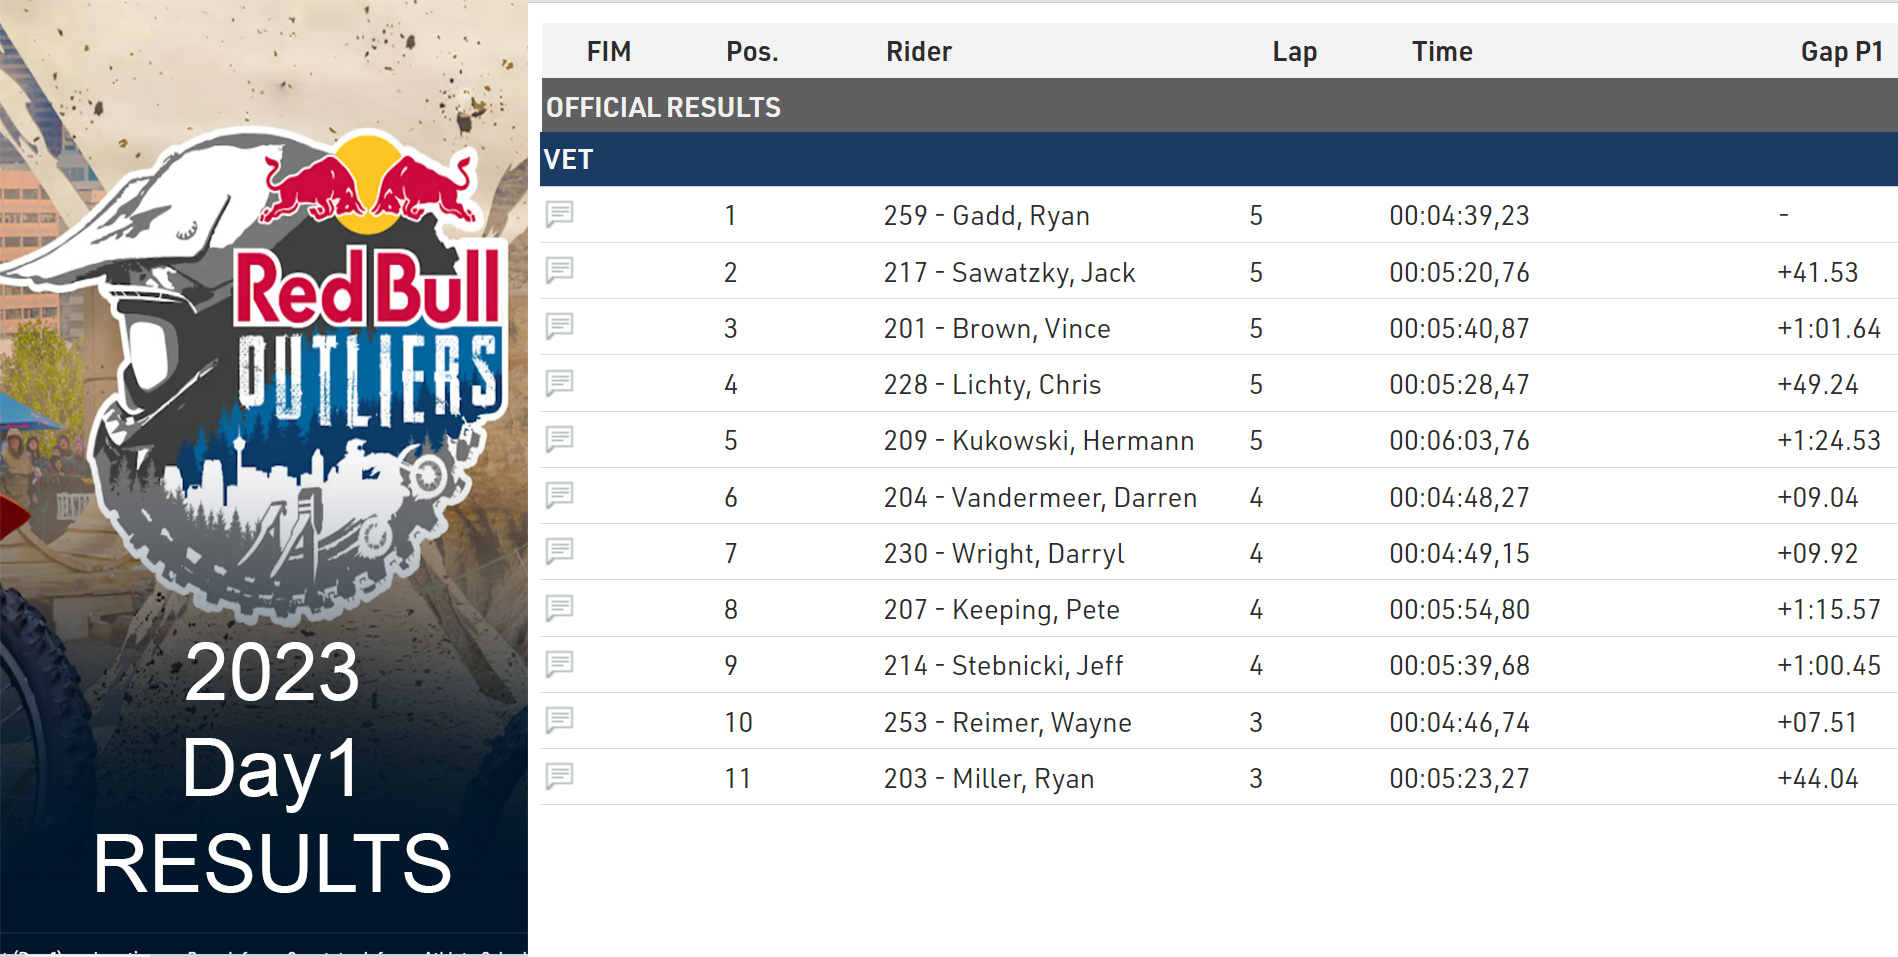 RESULTS 2023 Red Bull Outliers DAY 1 DBN